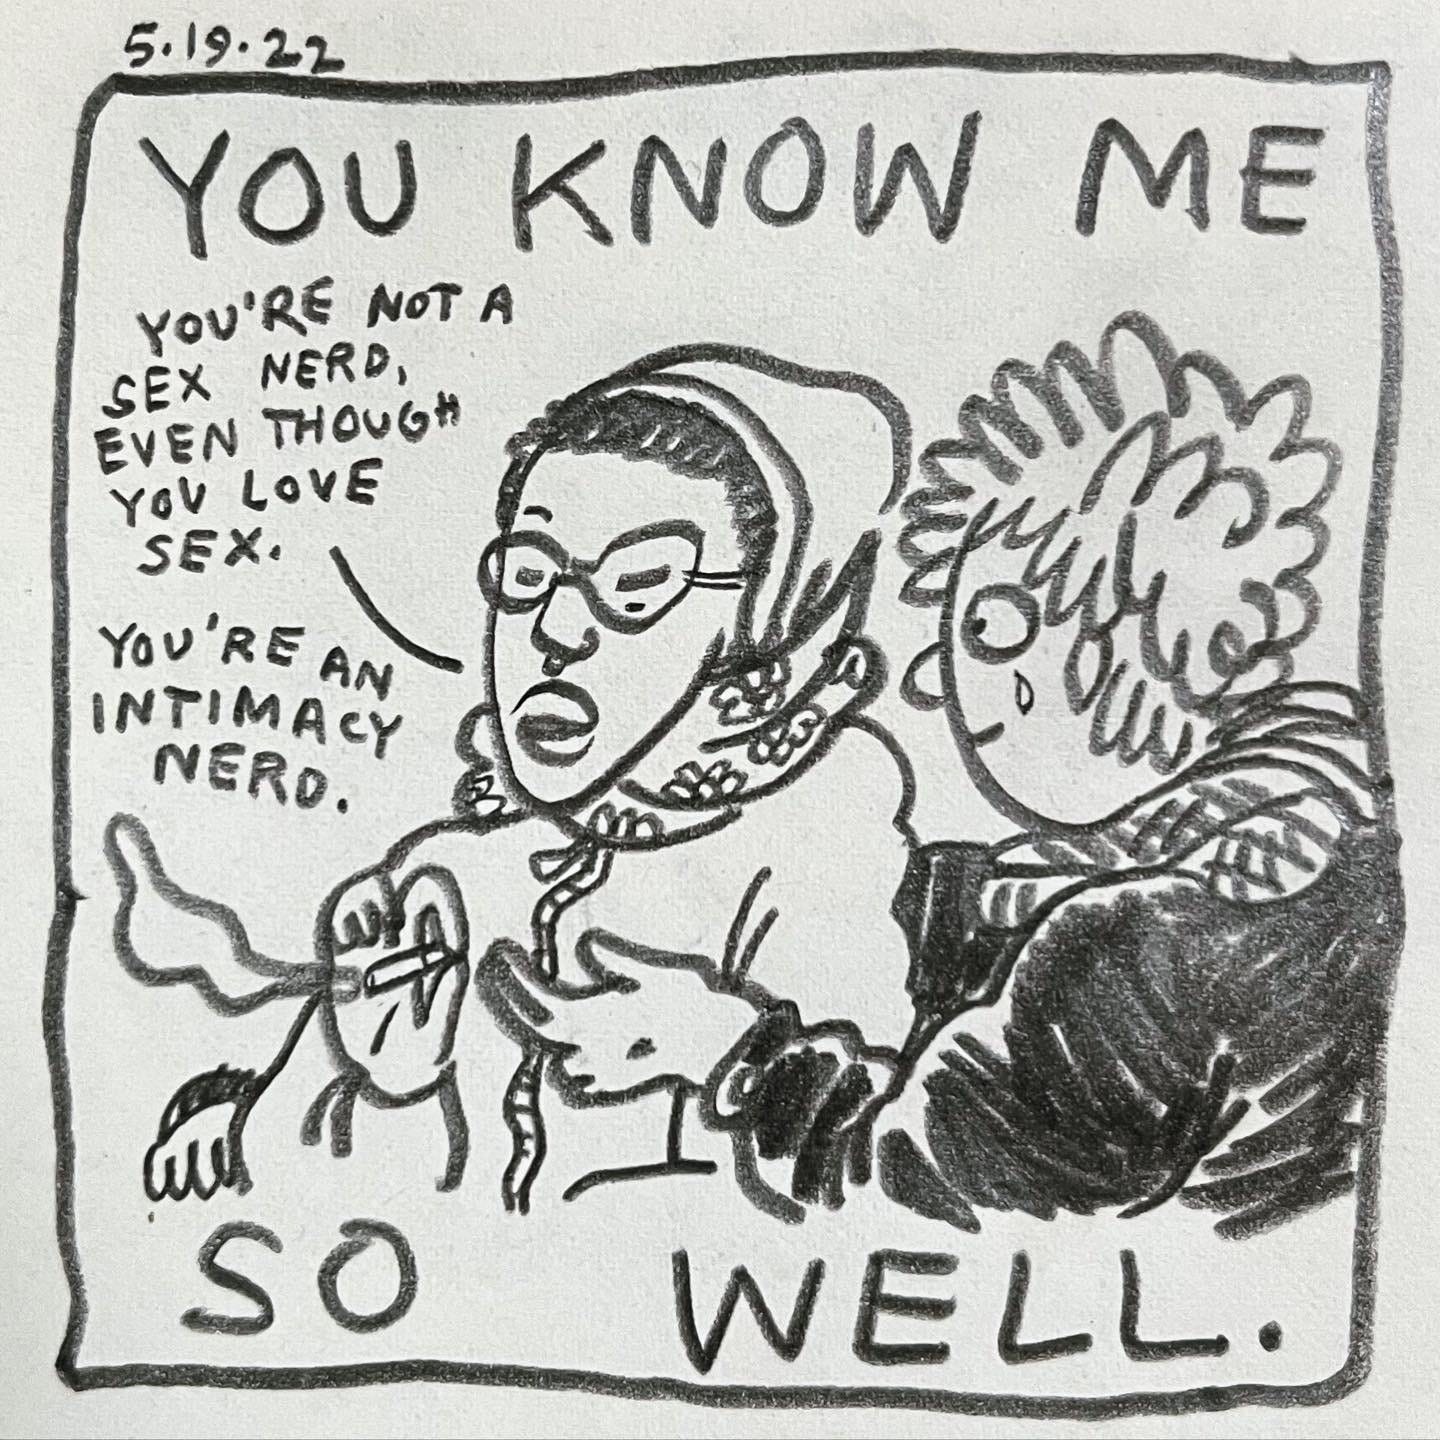 Panel 1: you know me so well. Image: Maze passes Lark a joint. Maze wears glasses, a hoodie, a septum piercing and a floral scarf. Lark sits next to Maze, shedding one happy tear, wearing a black leather jacket and scarf. Maze, arches one eyebrow and says “you’re not a sex nerd, even though you love sex. You’re an intimacy nerd."